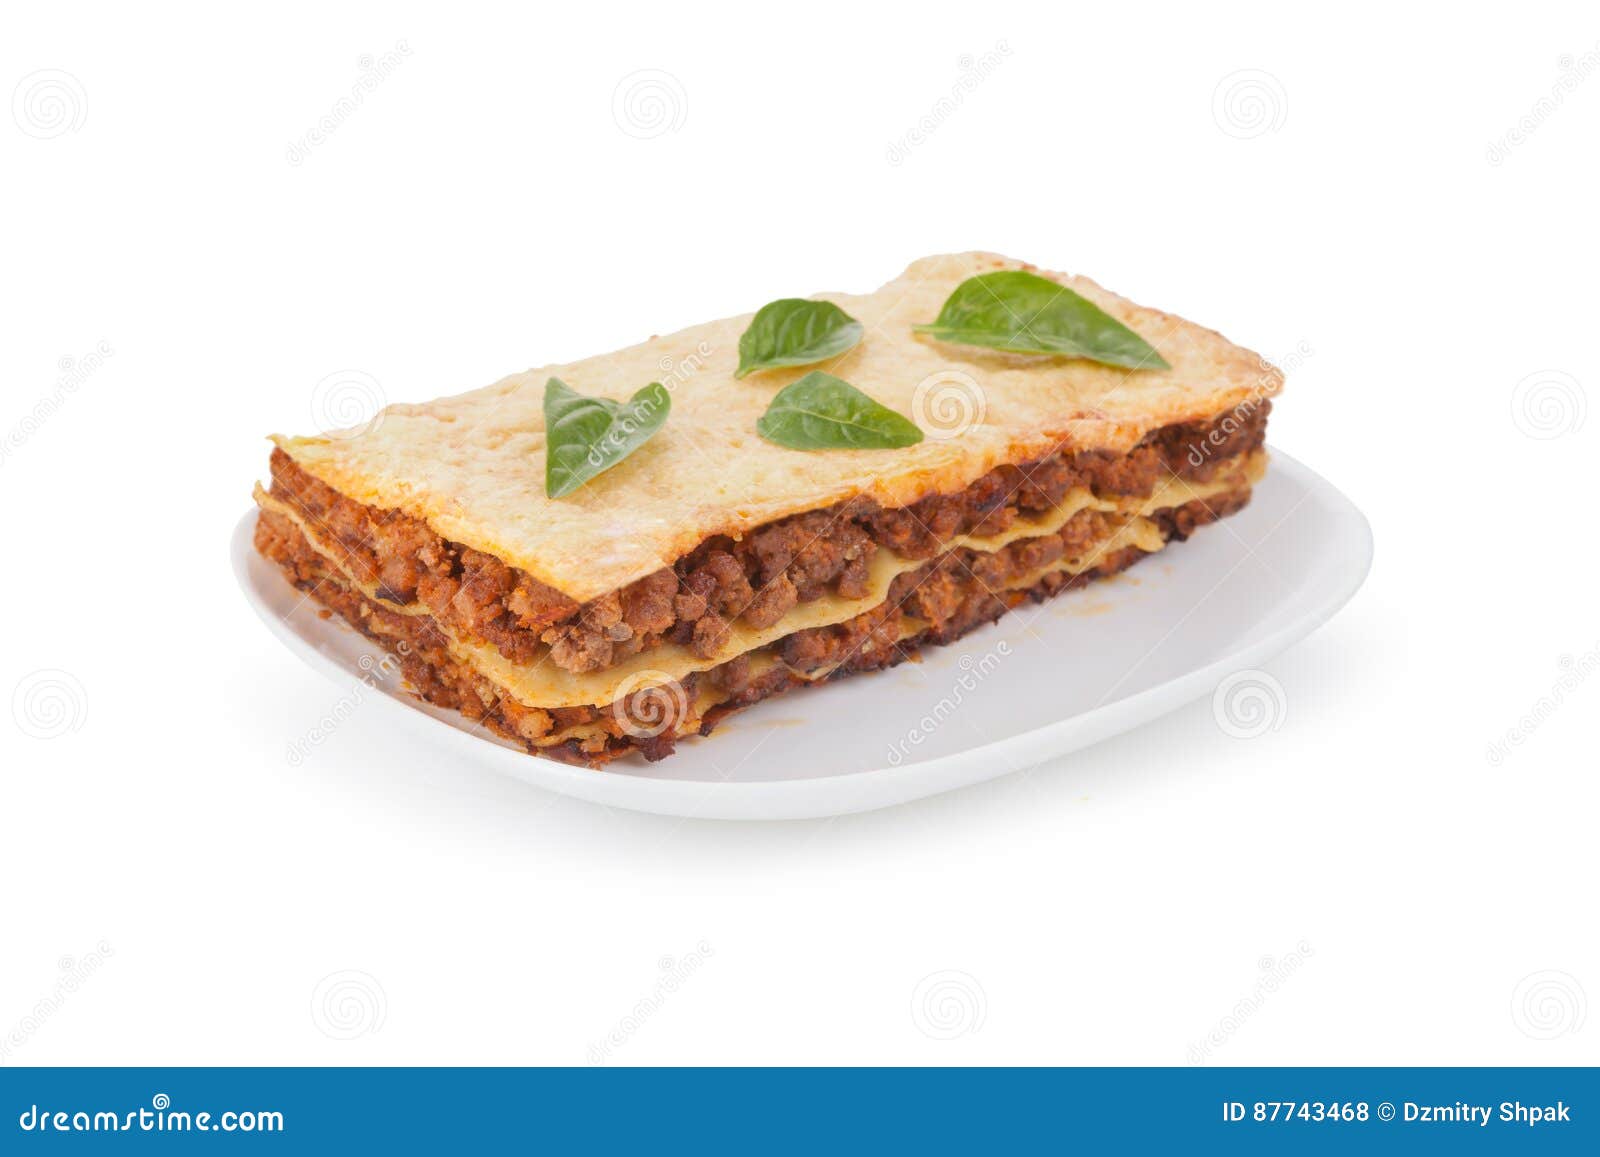 Tasty Lasagna Isolated on a White Background Stock Photo - Image of ...